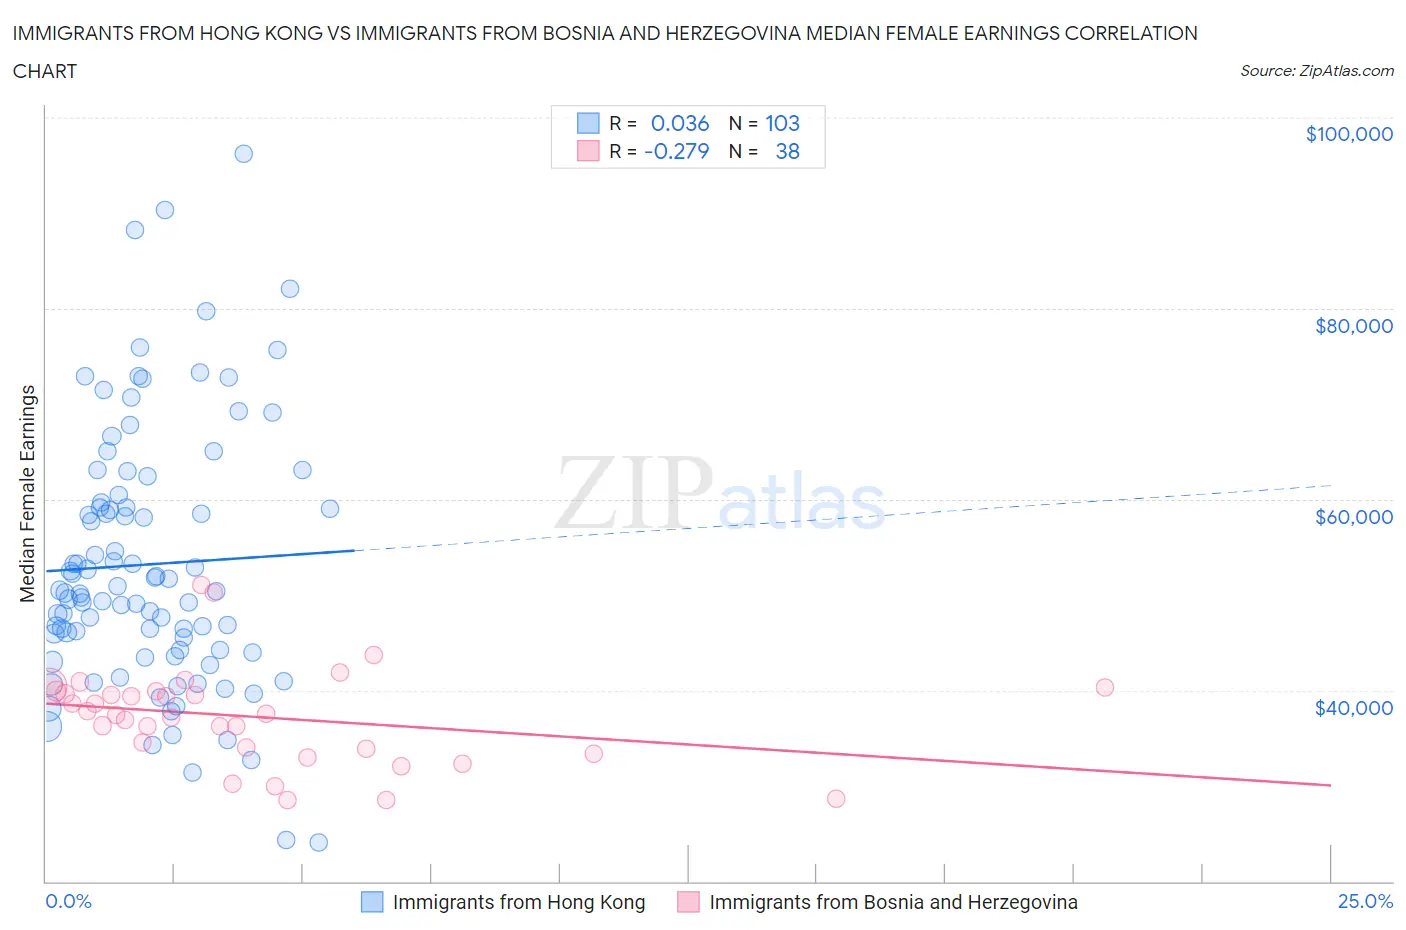 Immigrants from Hong Kong vs Immigrants from Bosnia and Herzegovina Median Female Earnings